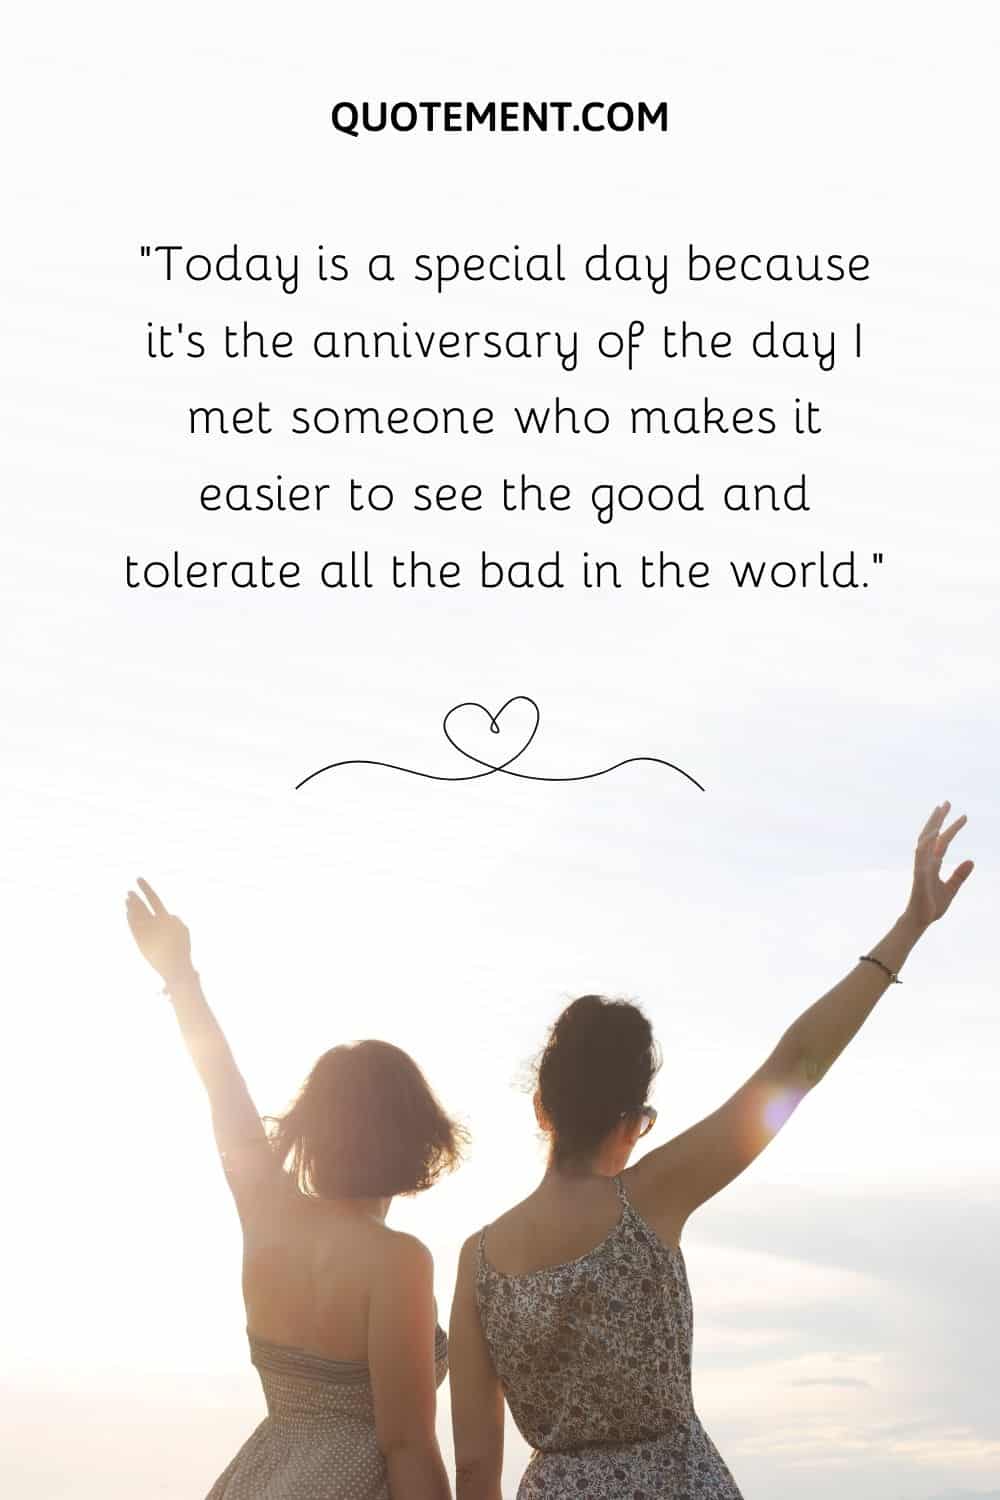 it’s the anniversary of the day I met someone who makes it easier to see the good and tolerate all the bad in the world